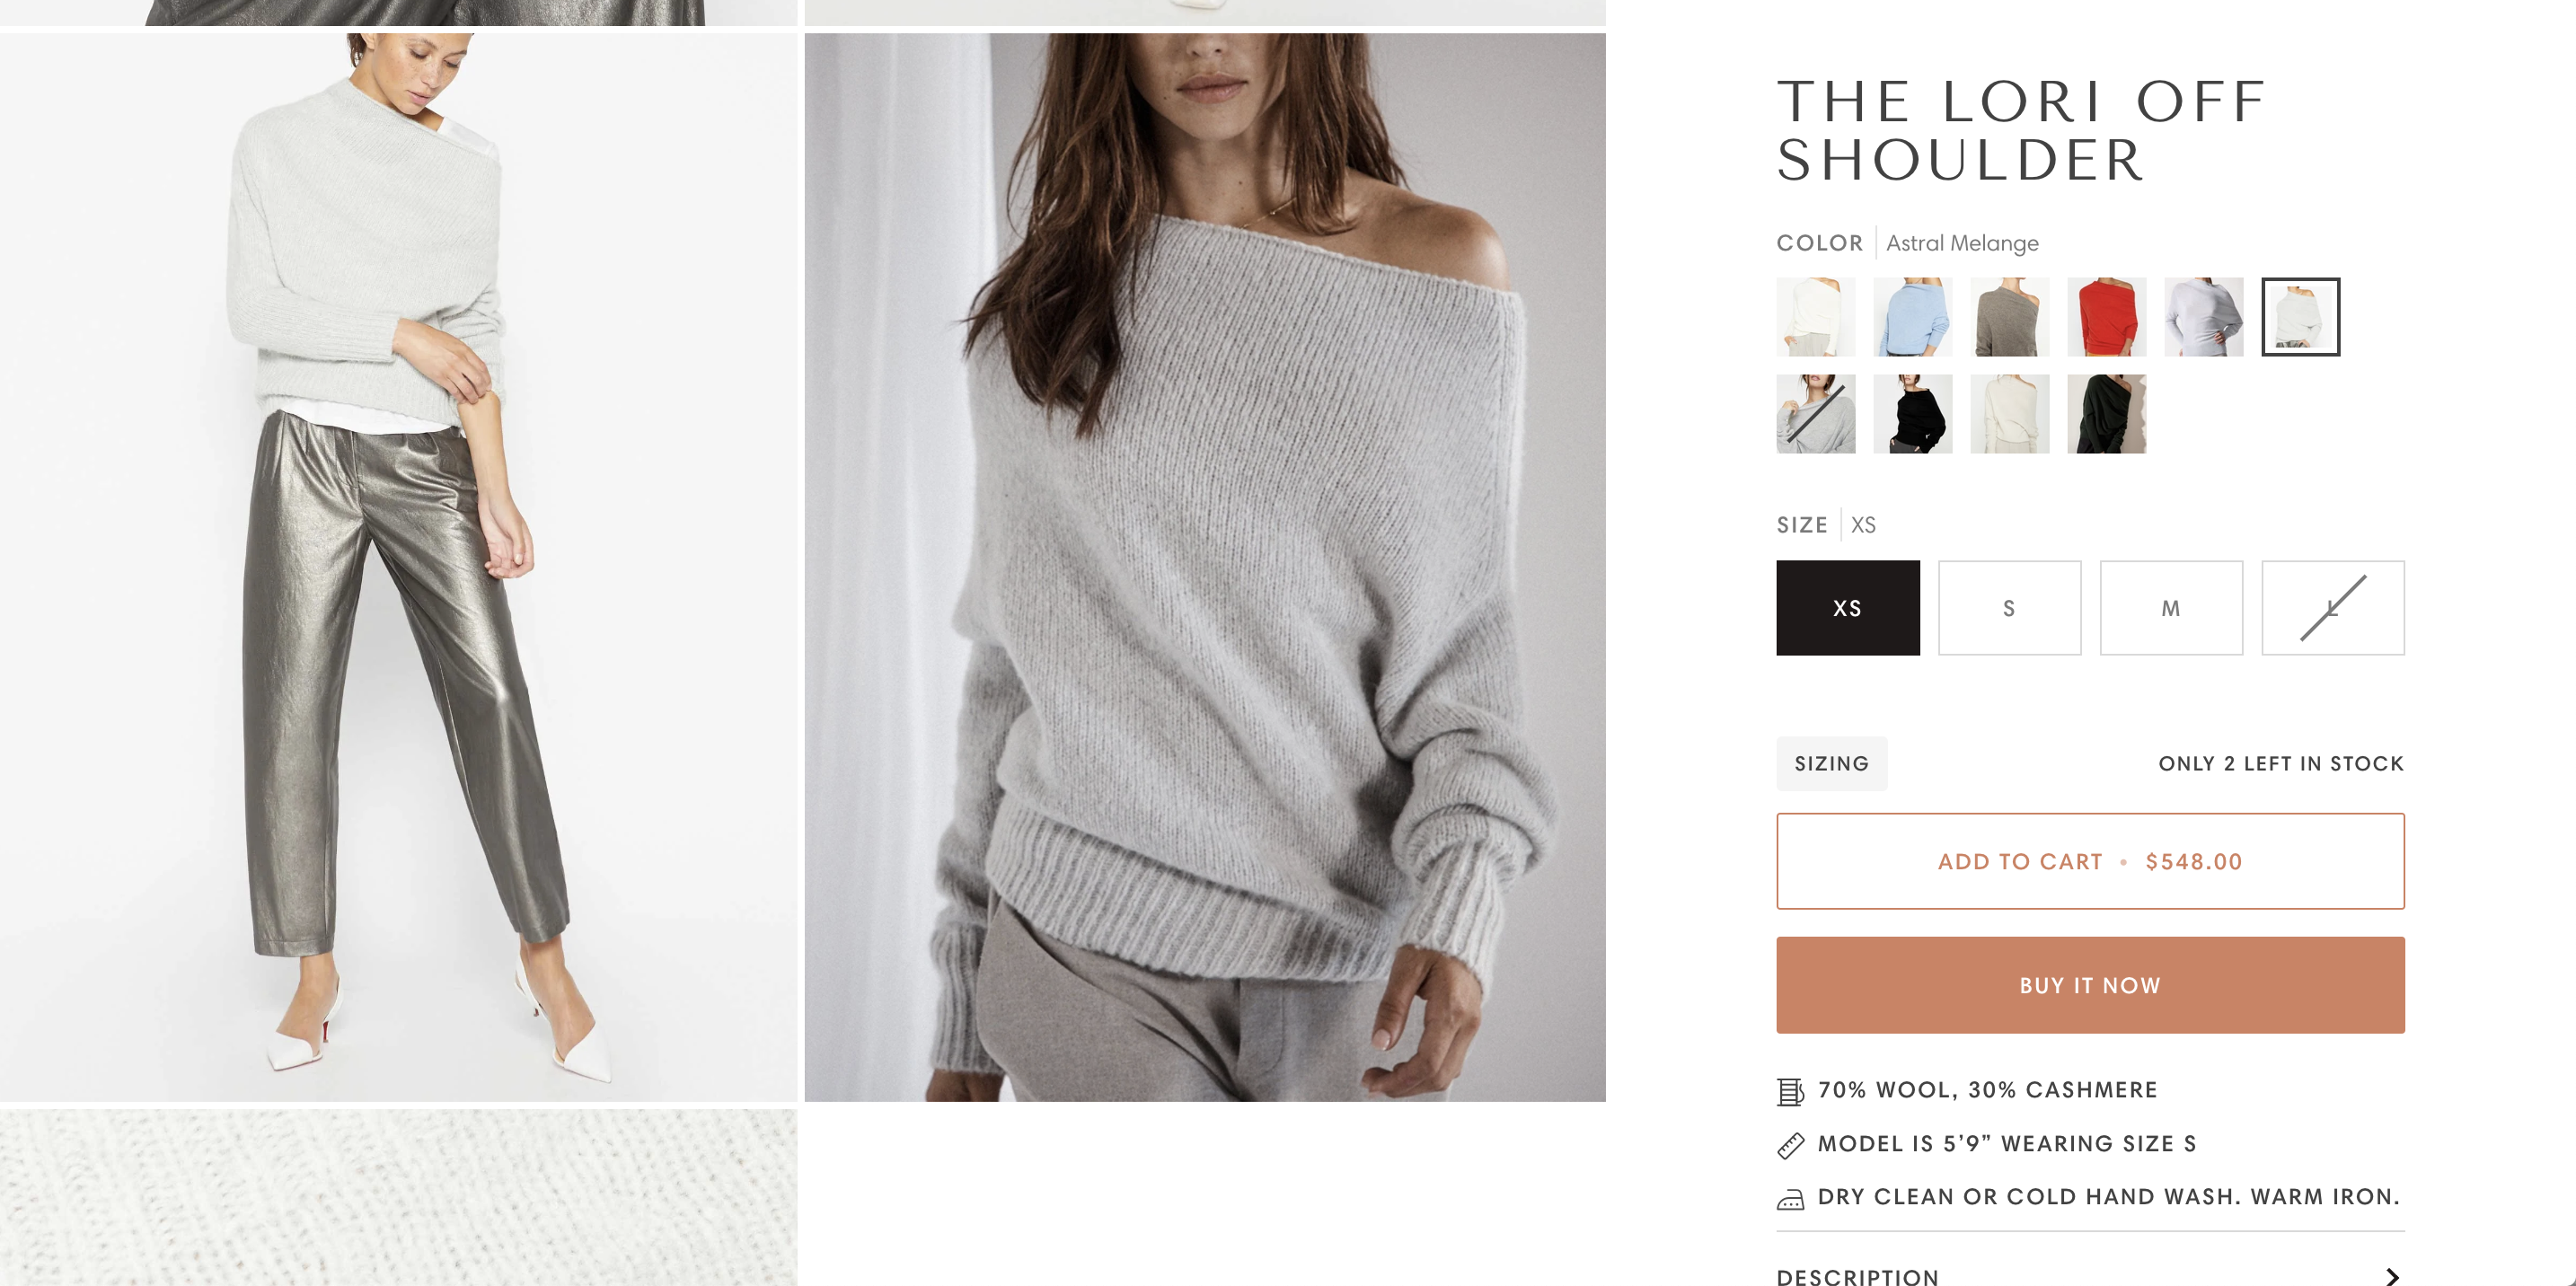 Picture of a sweater product page from a website using Pipeline theme that is one of the best Shopify themes.